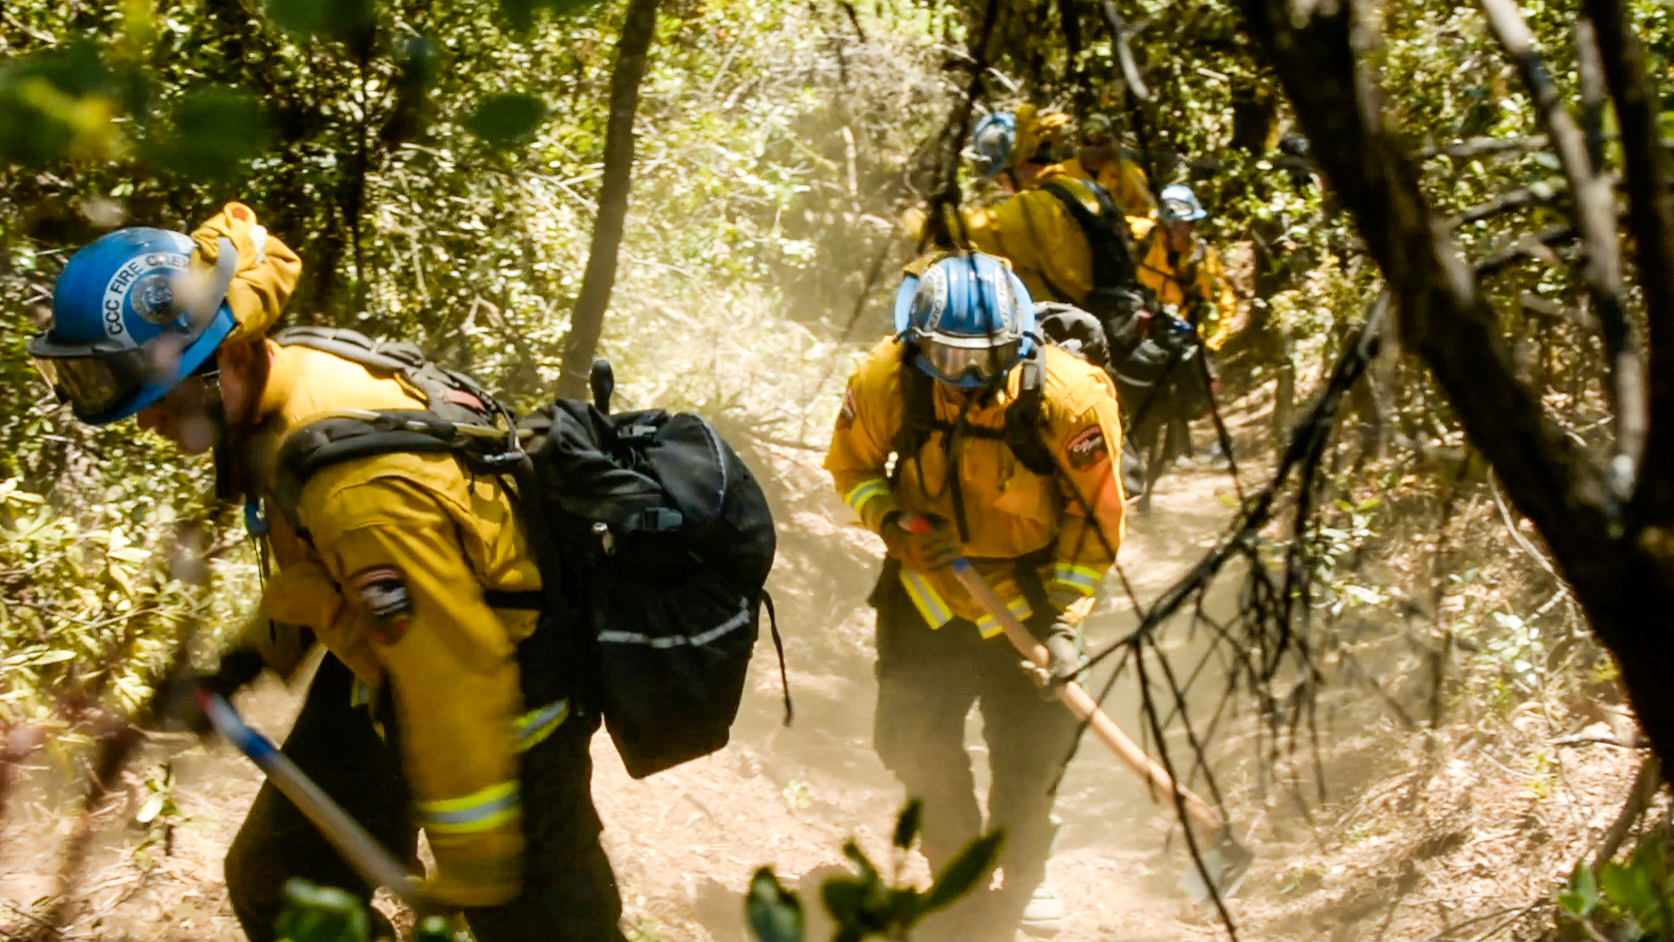 two corpsmembers in fire gear and with hand tools walk through wooded area, with tree limbs and leaves in foreground